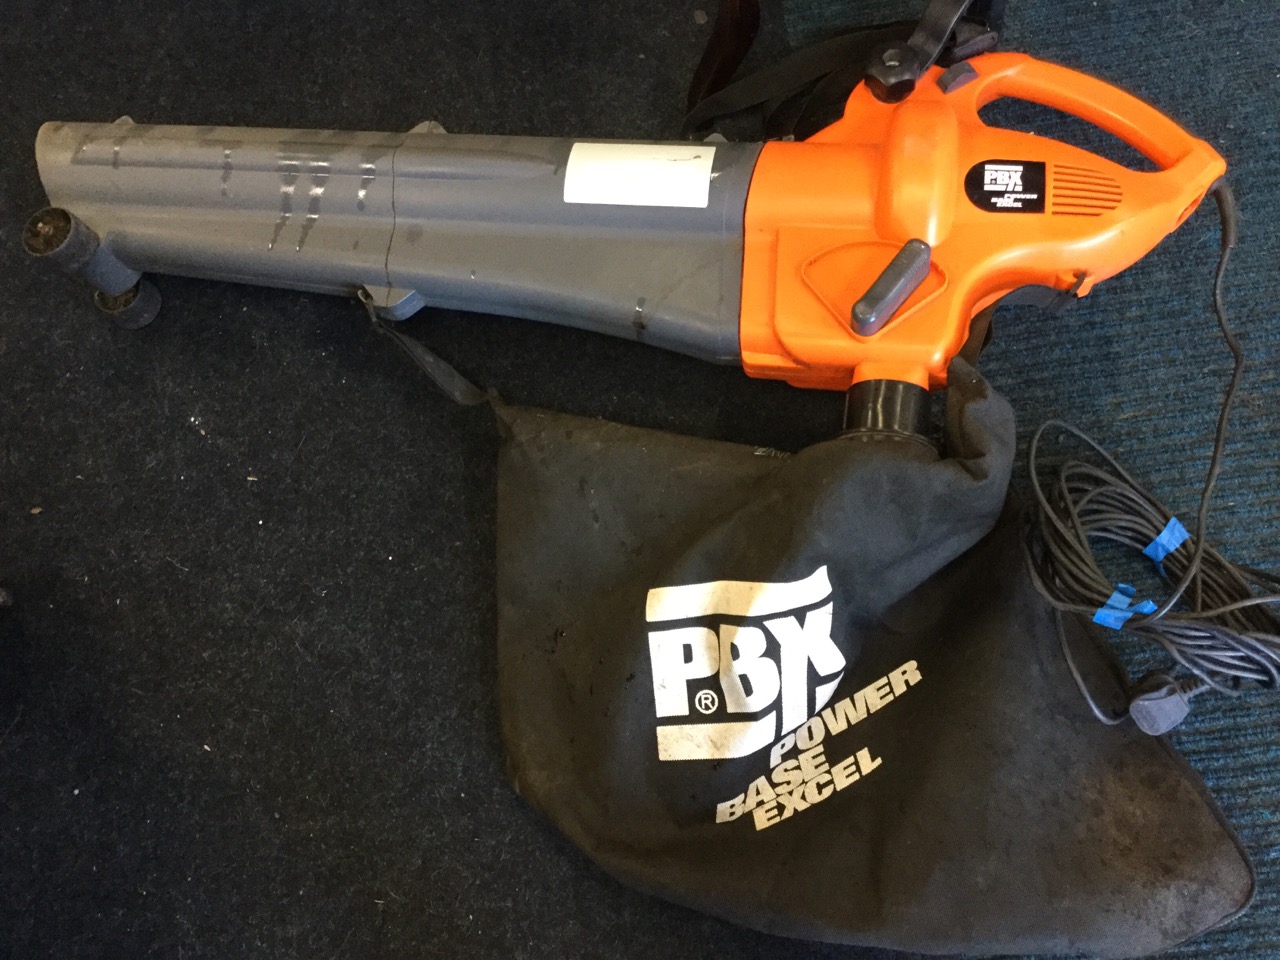 A Power Base excel 2400 watt electric garden blower/vac, with long cable and leaf collecting bag.